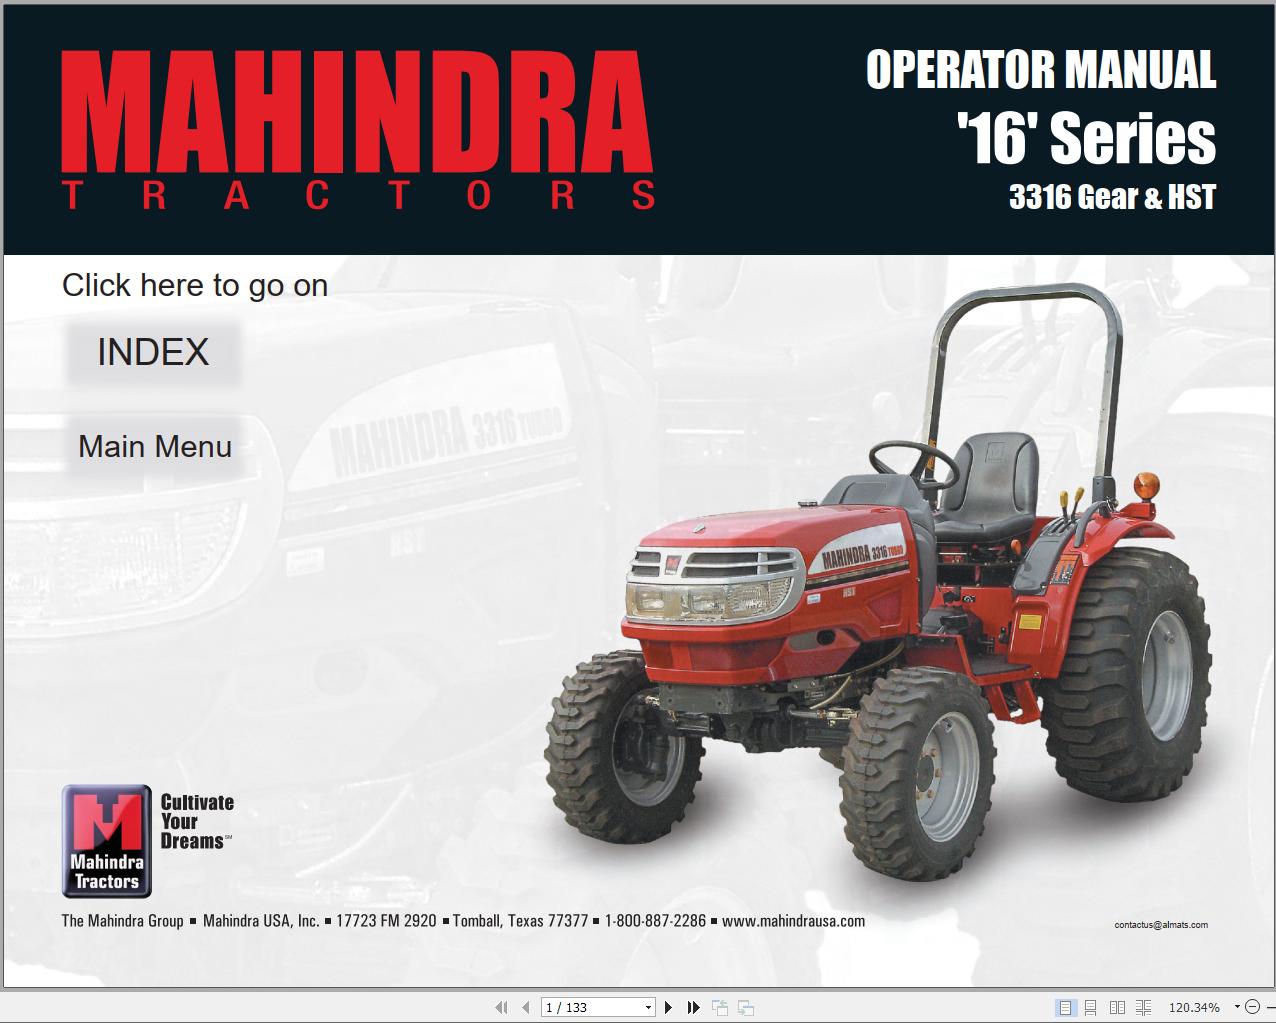 Mahindra Tractor 16 Series 3316 Gear HST Full Operator Manual Fast Download